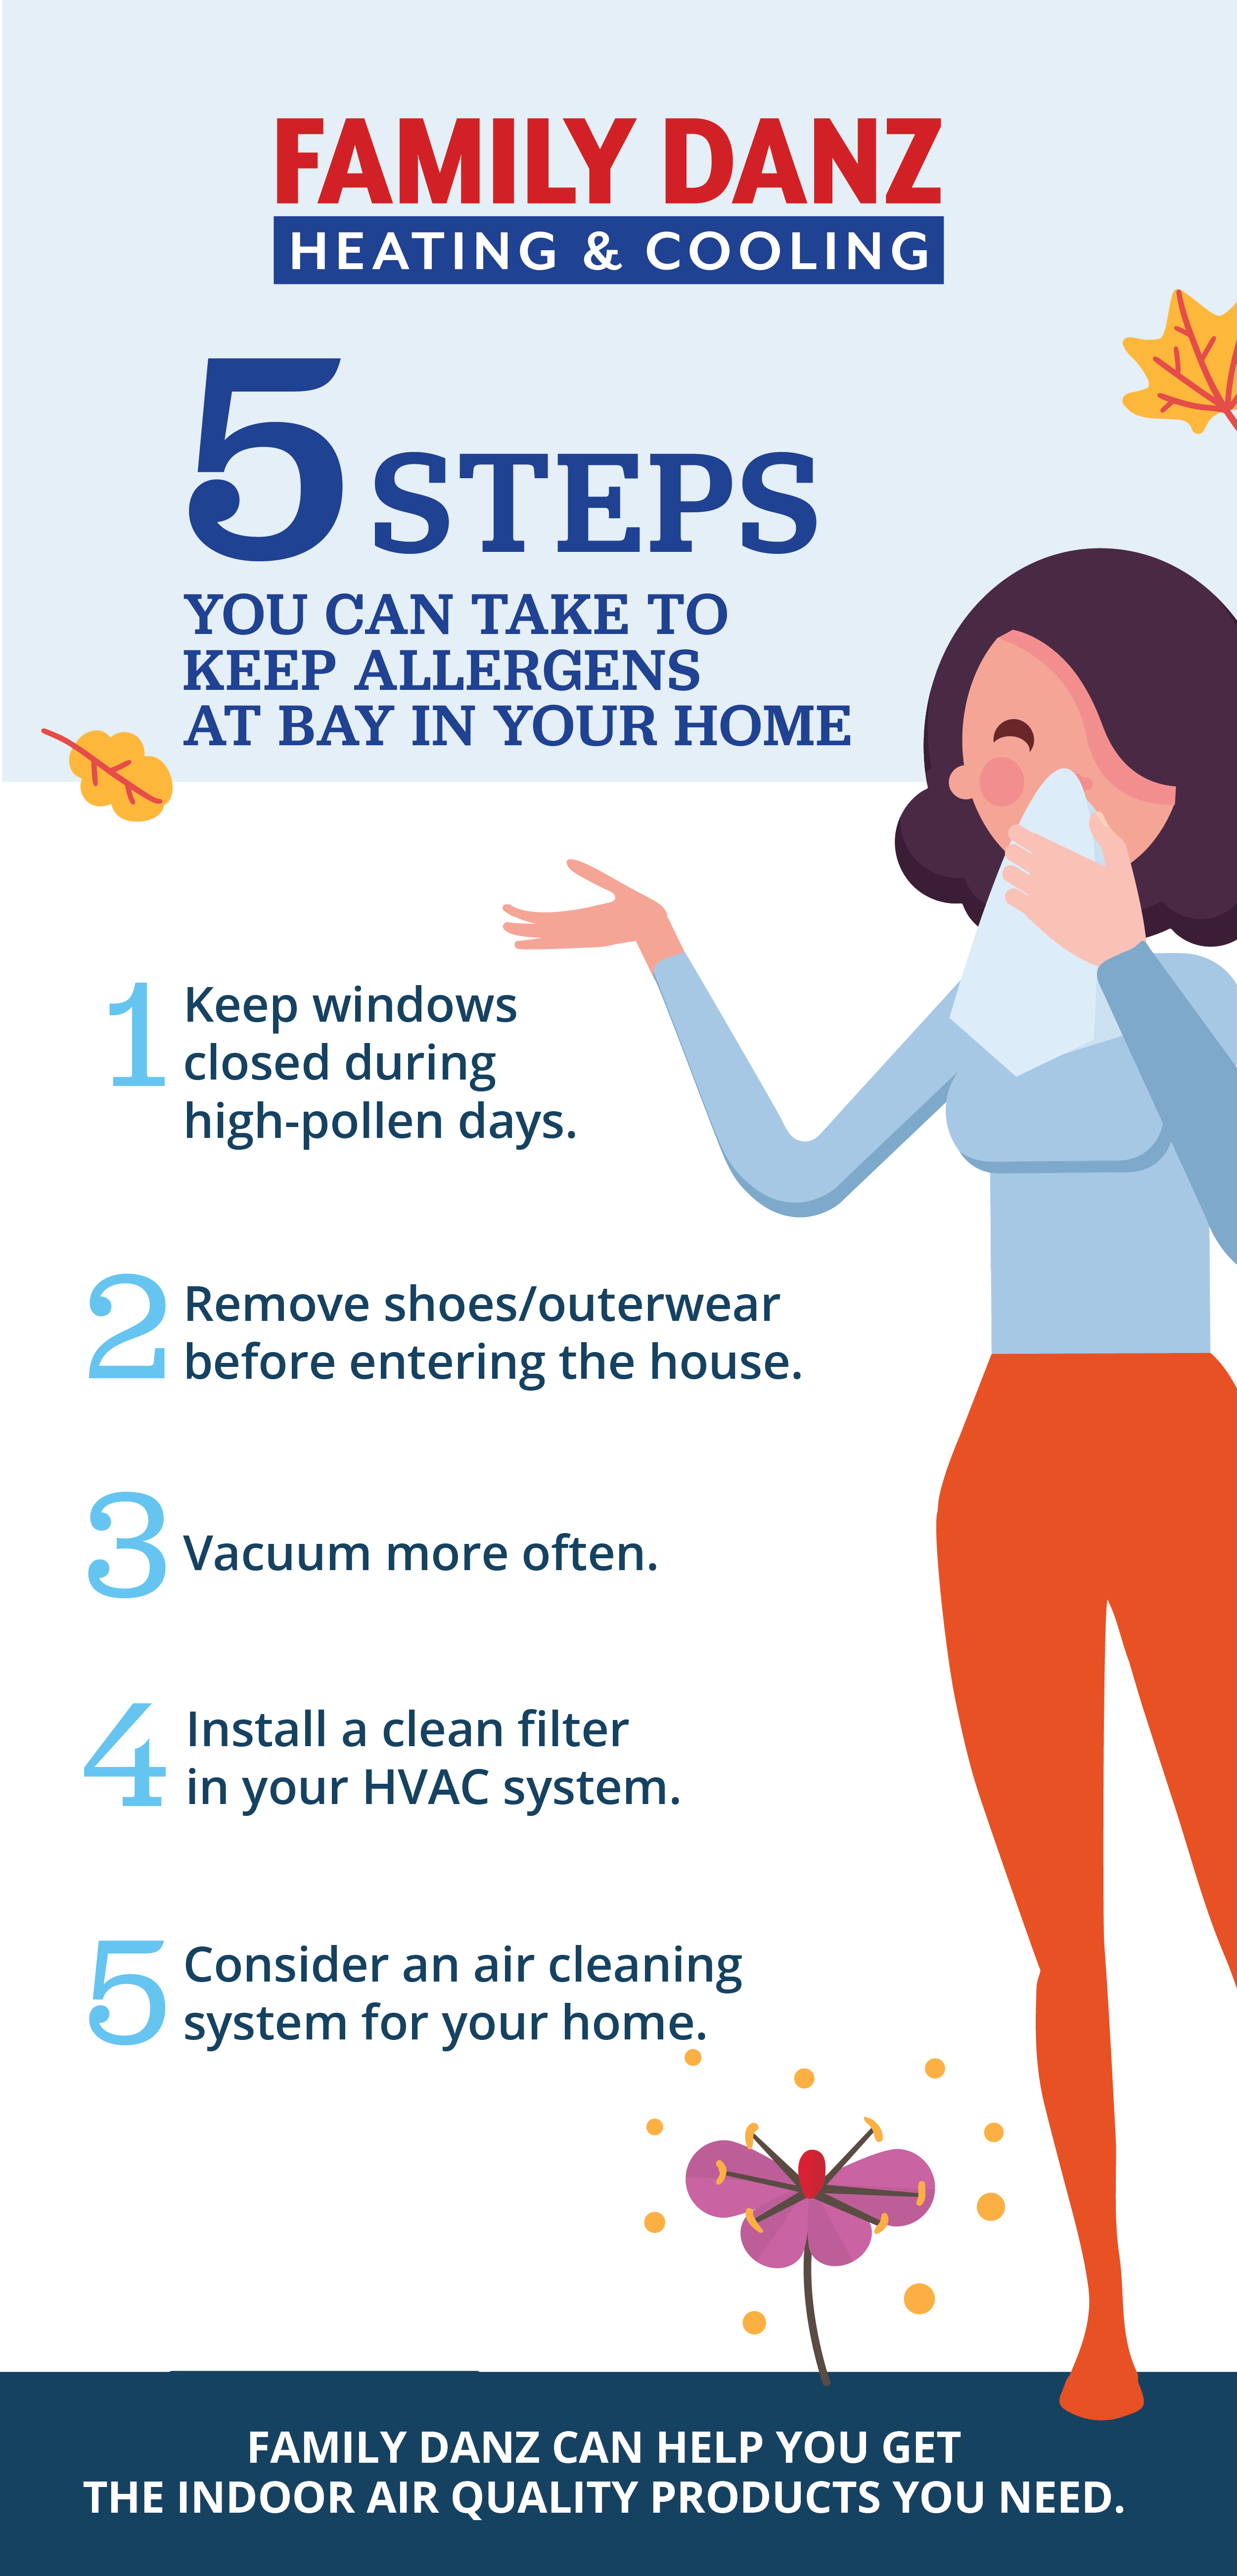 5 Steps You Can Take to Keep Your Allergens at Bay in Your Home Infographic.